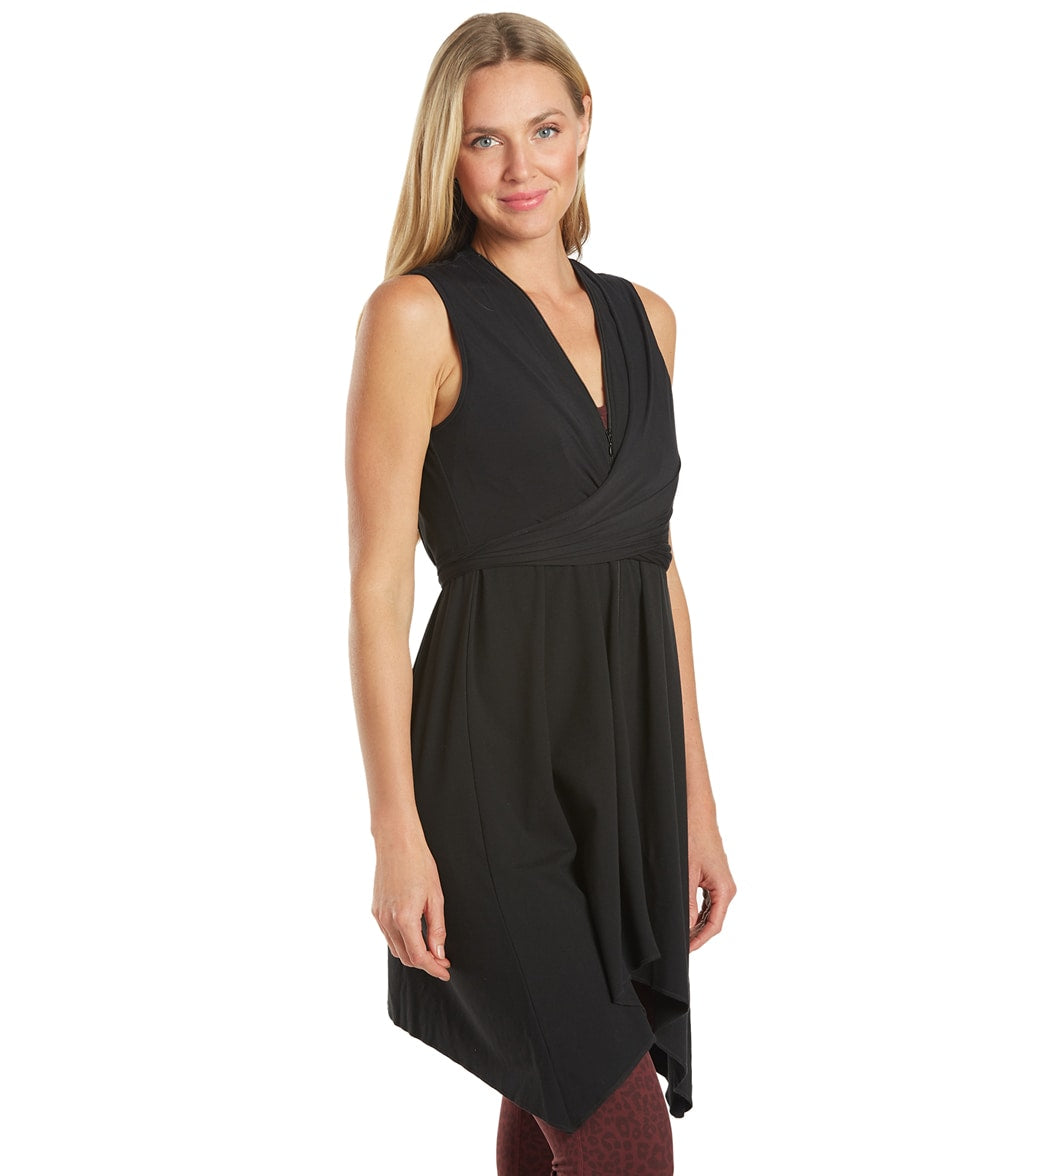 Everyday Yoga Wondrous Solid Wrap Dress at YogaOutlet.com - Free Shipping –